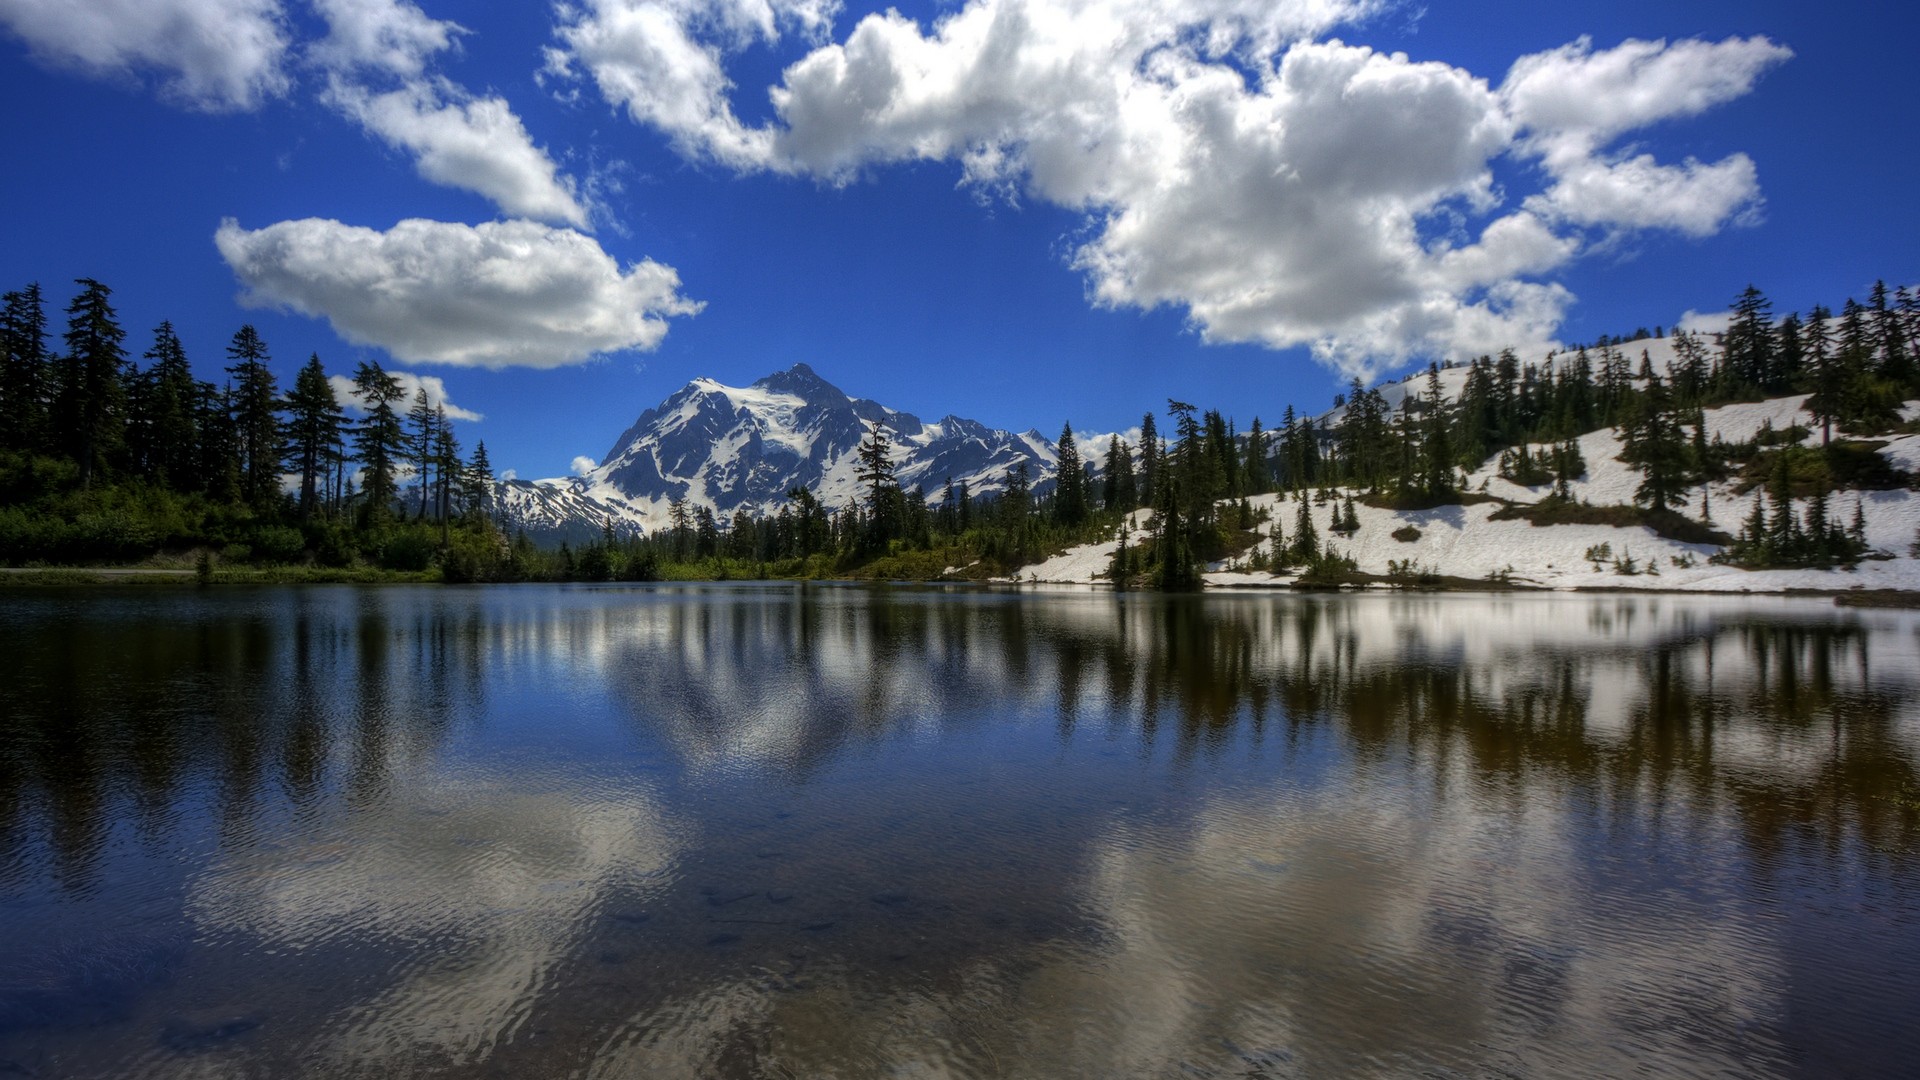 General 1920x1080 nature HDR lake landscape clouds water reflection